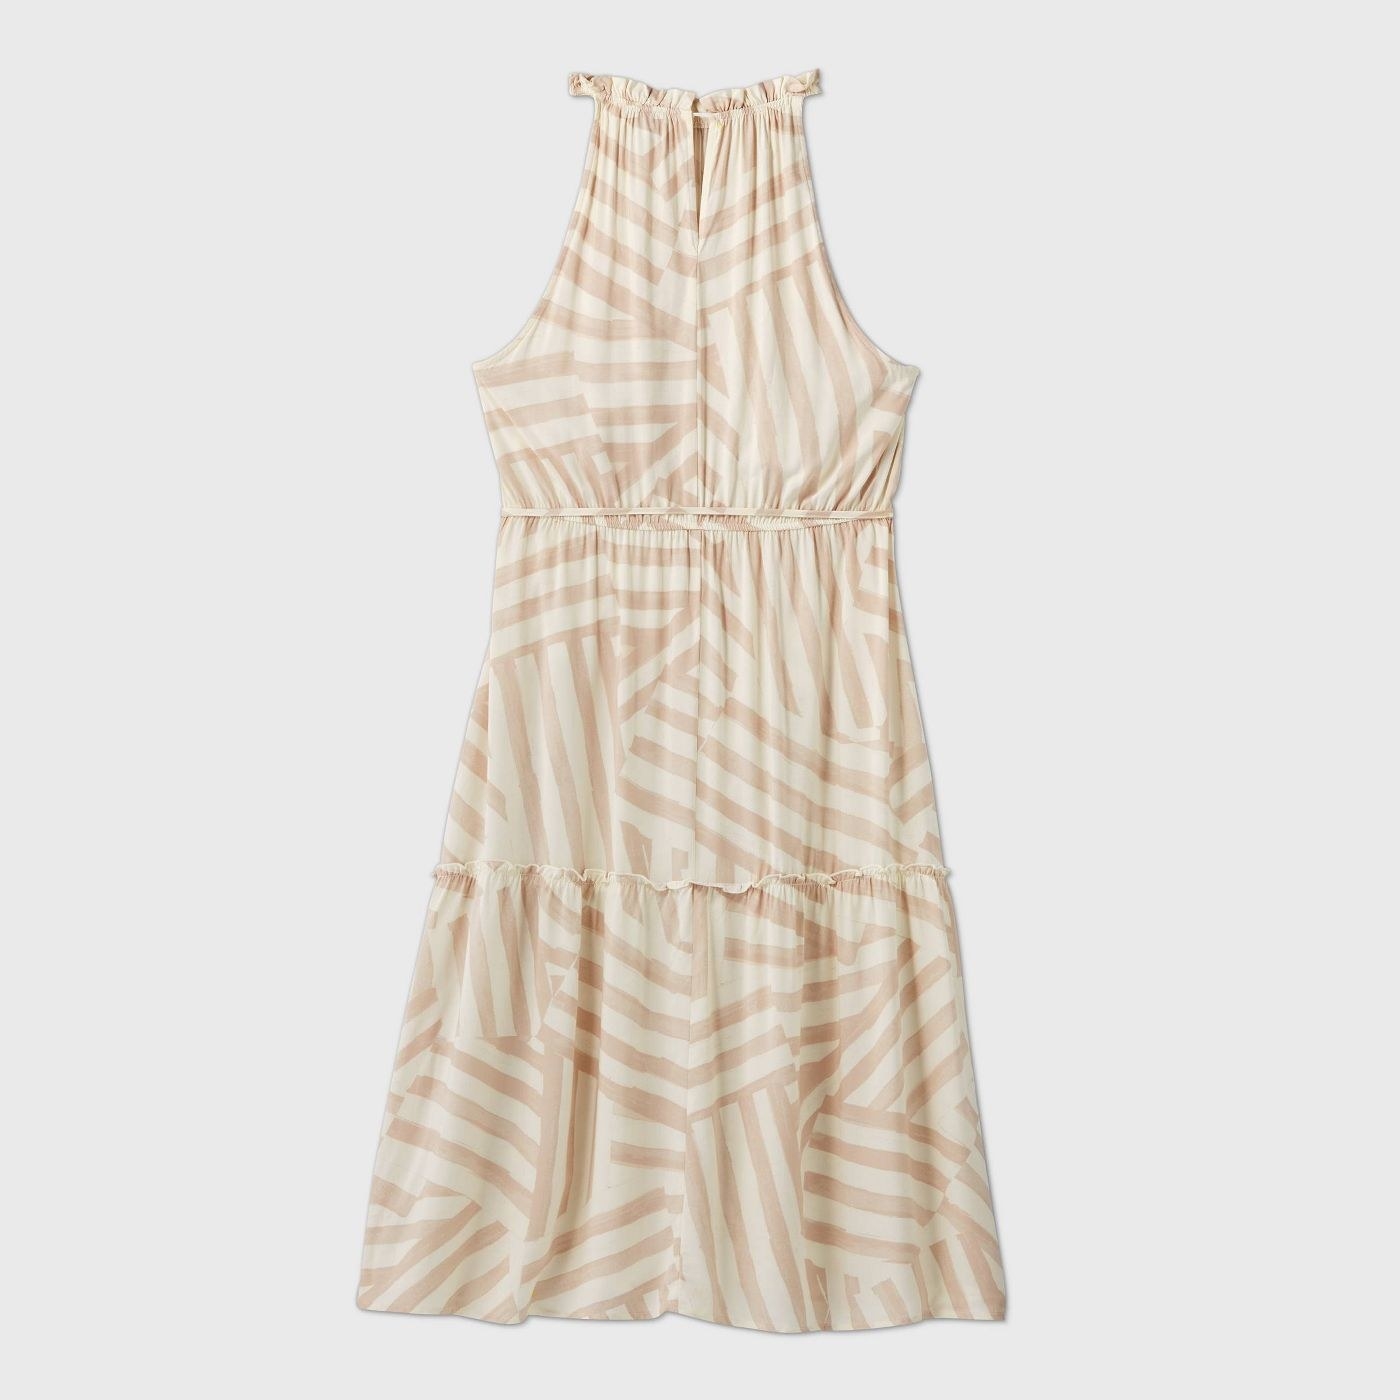 THe mismatched striped dress in beige and ivory tones 